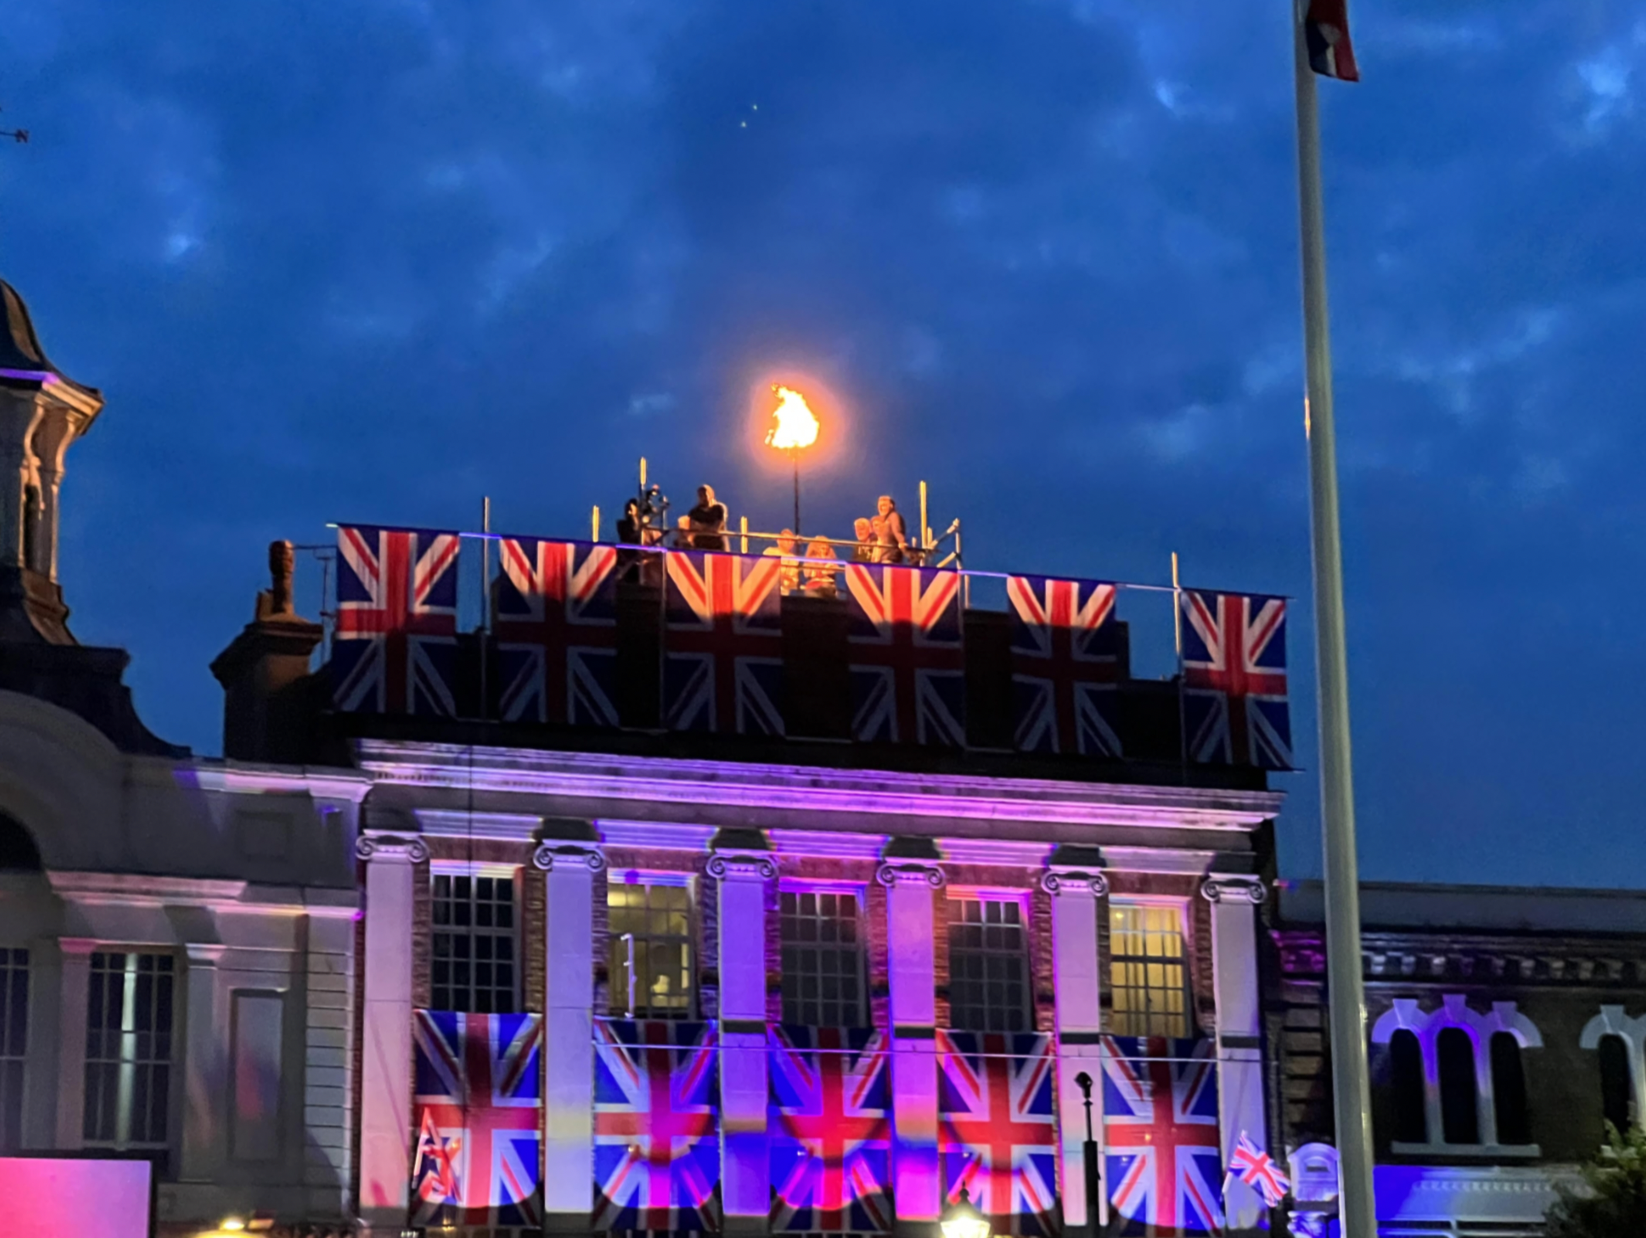 A beacon was lit at Hitchin Market Place to mark the Queen's Platinum Jubilee. CREDIT: @HitchinNubNews